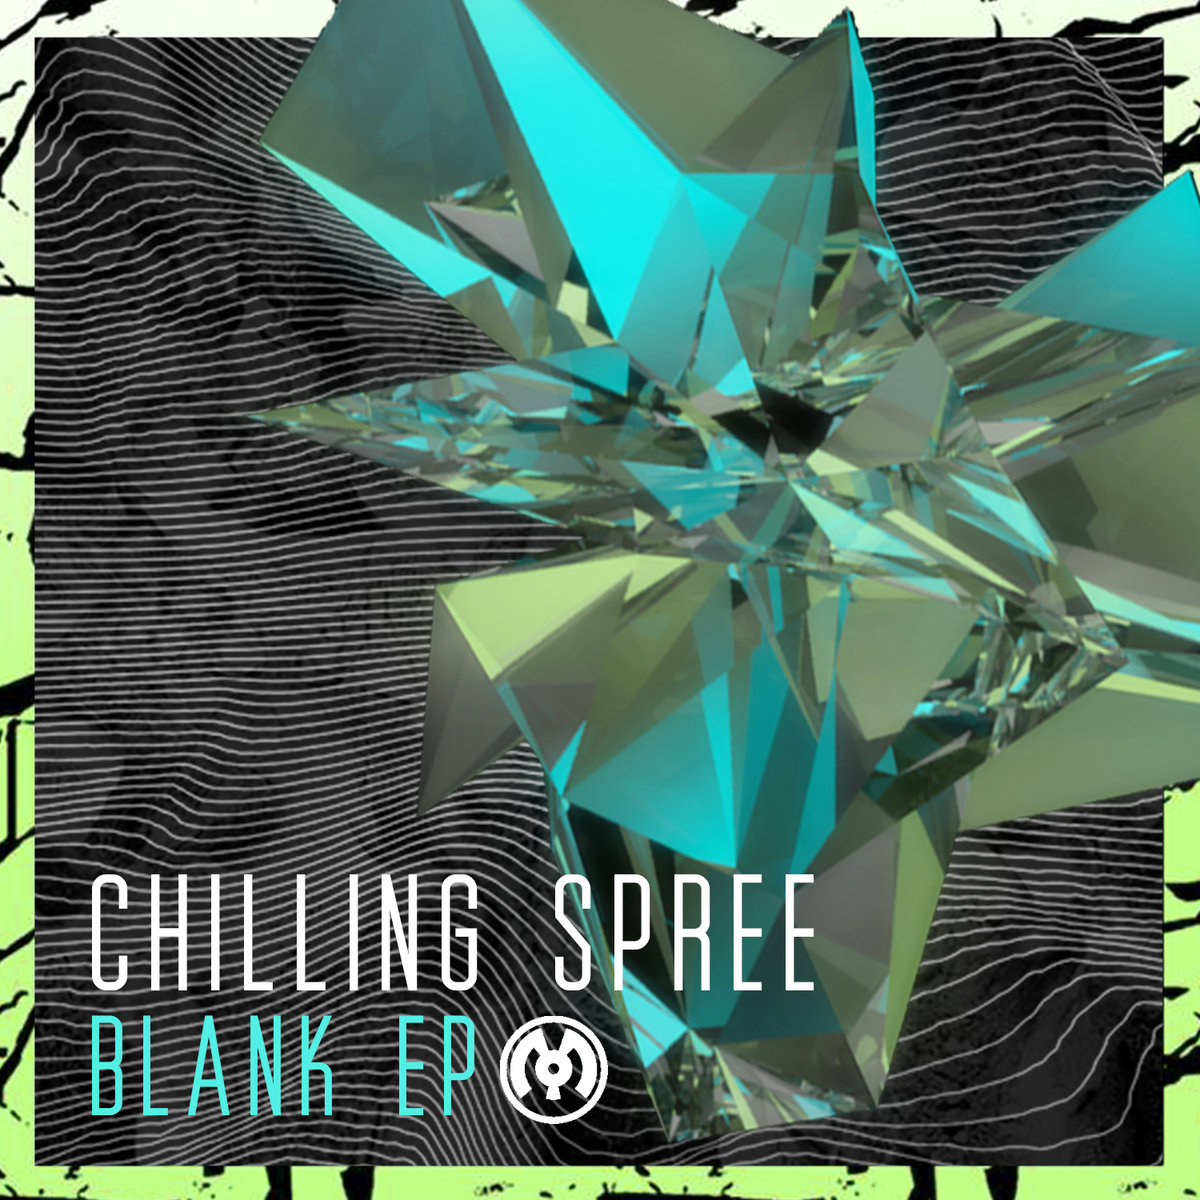 Chilling Spree - Porkchop Express @ 'The Blank EP' album (electronic, dubstep)